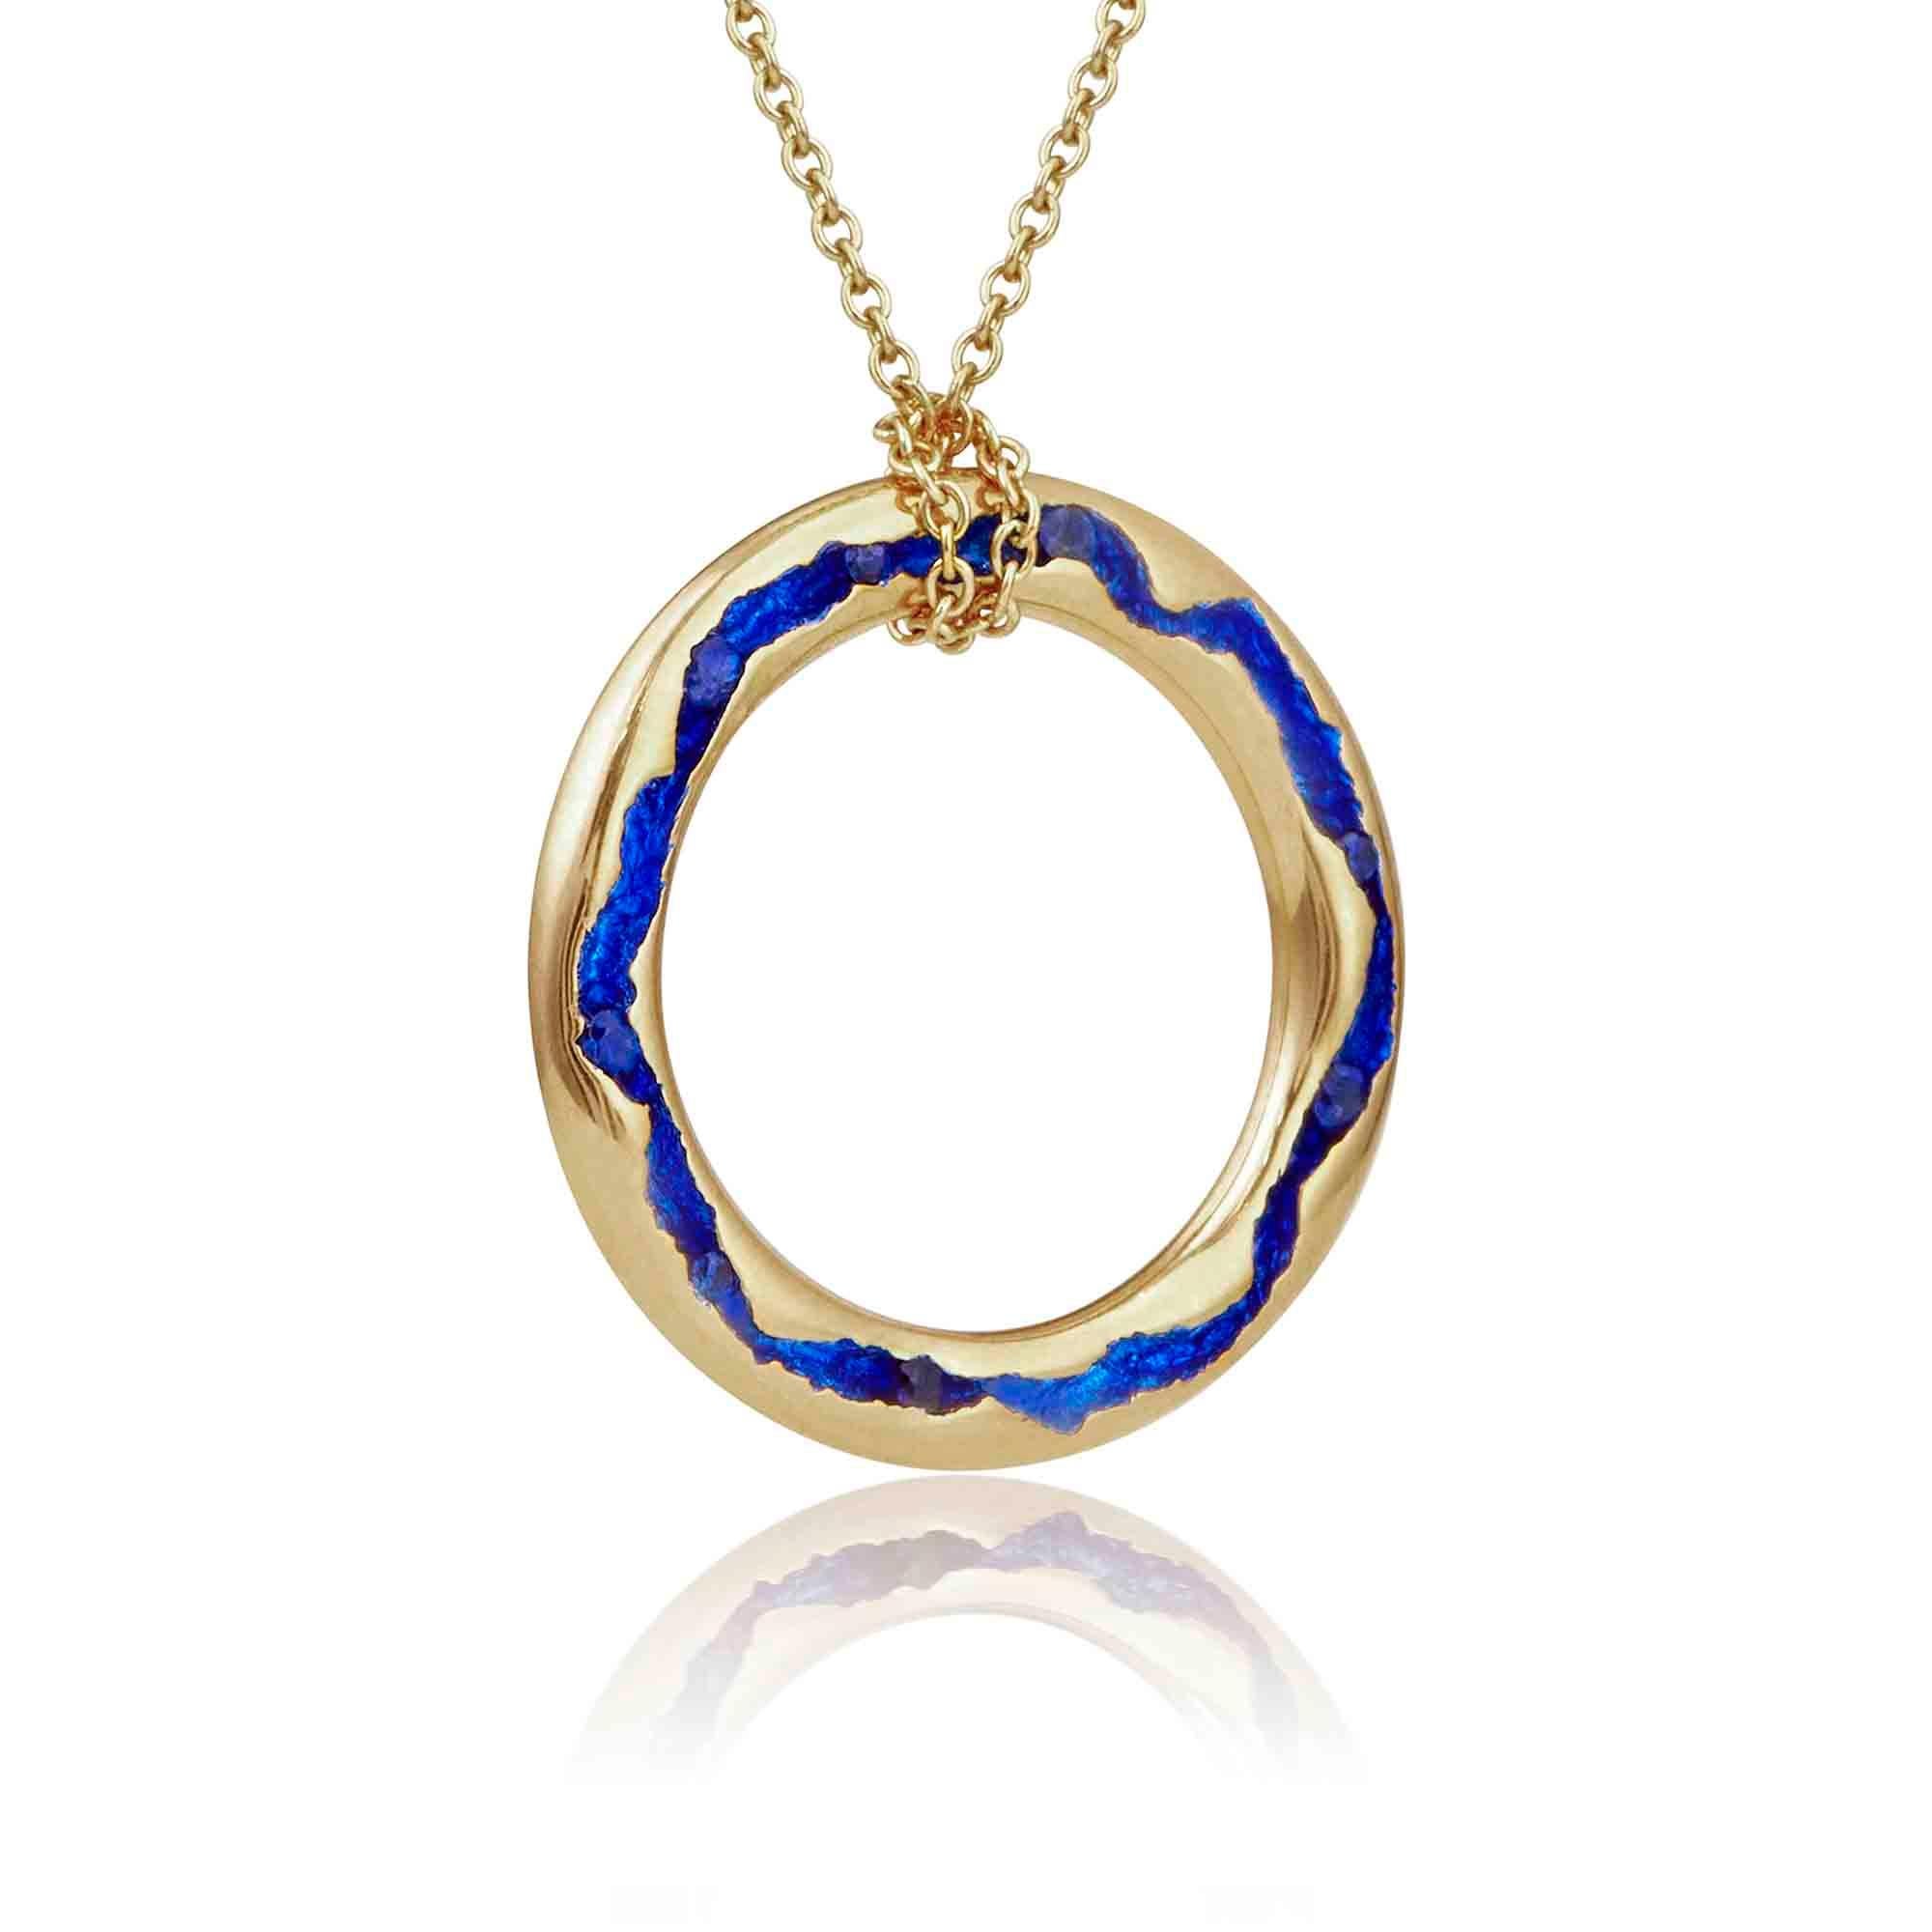 Take a nostalgic journey with our Electric Blue Sapphire gold pendant from the Rock Pool Collection. This exquisite piece is inspired by cherished childhood island adventures, evoking images of hidden sea creatures and vibrant blue waters. It